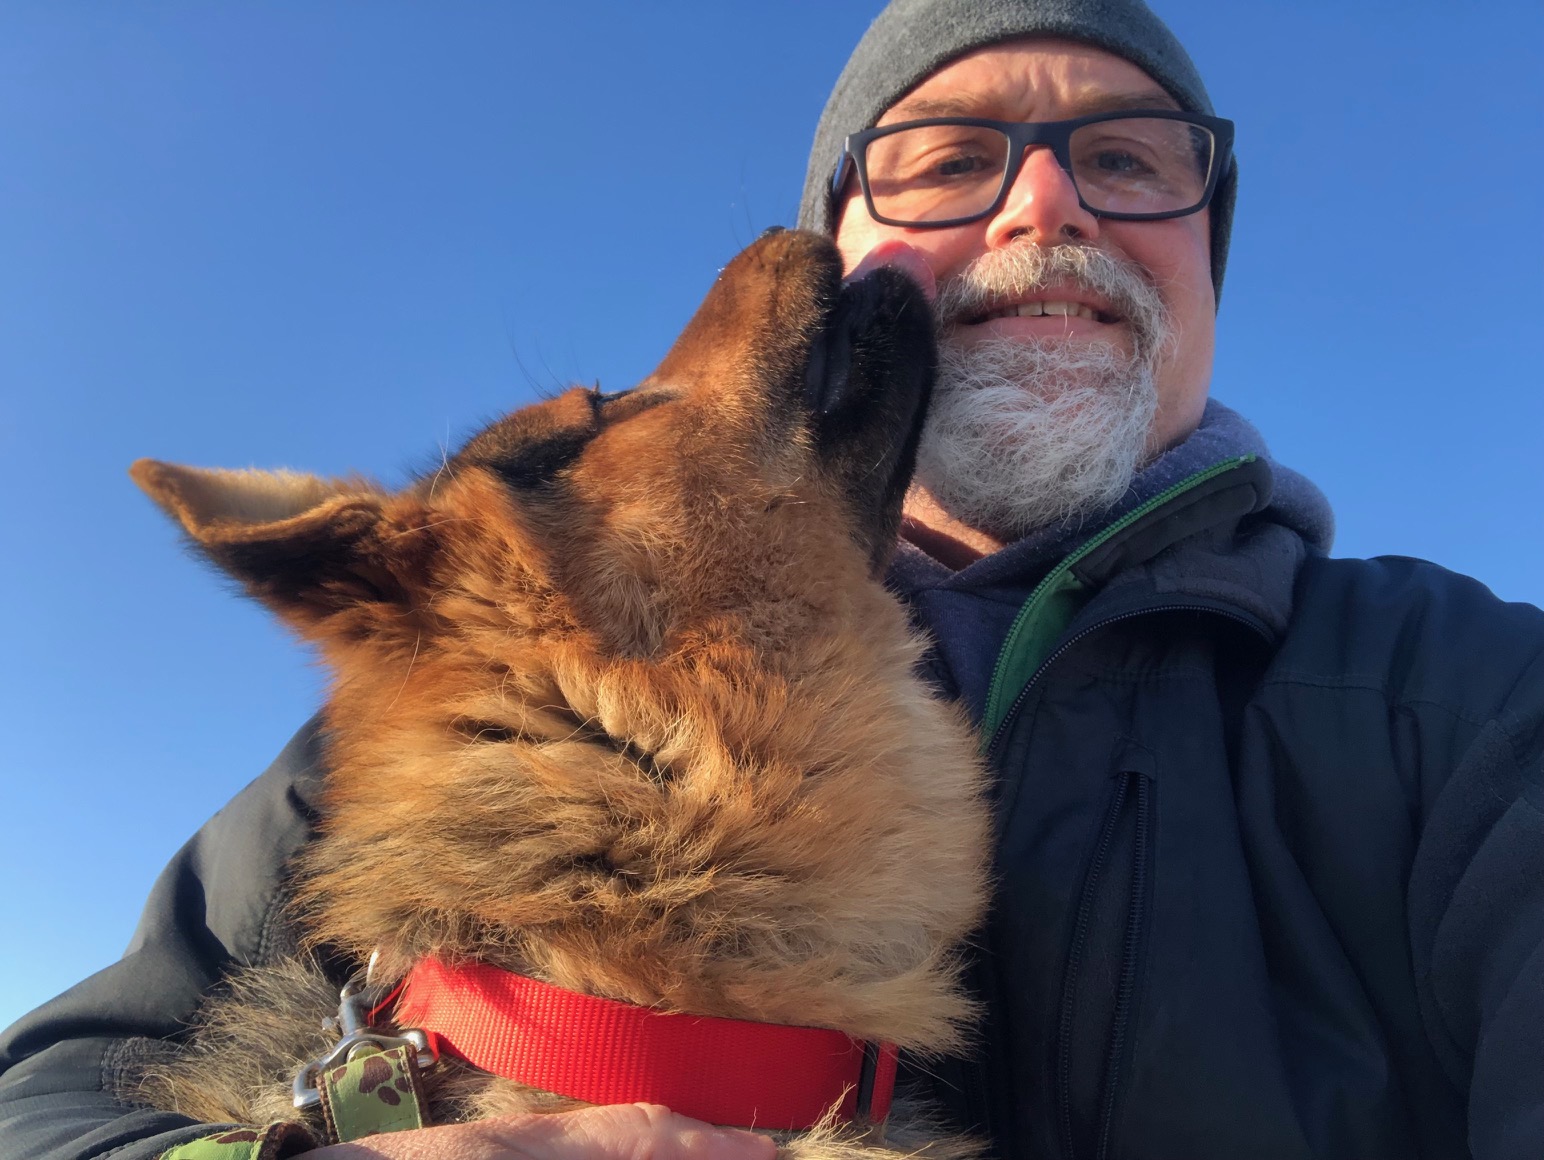 Pietsch (man) with a dog licking his face.